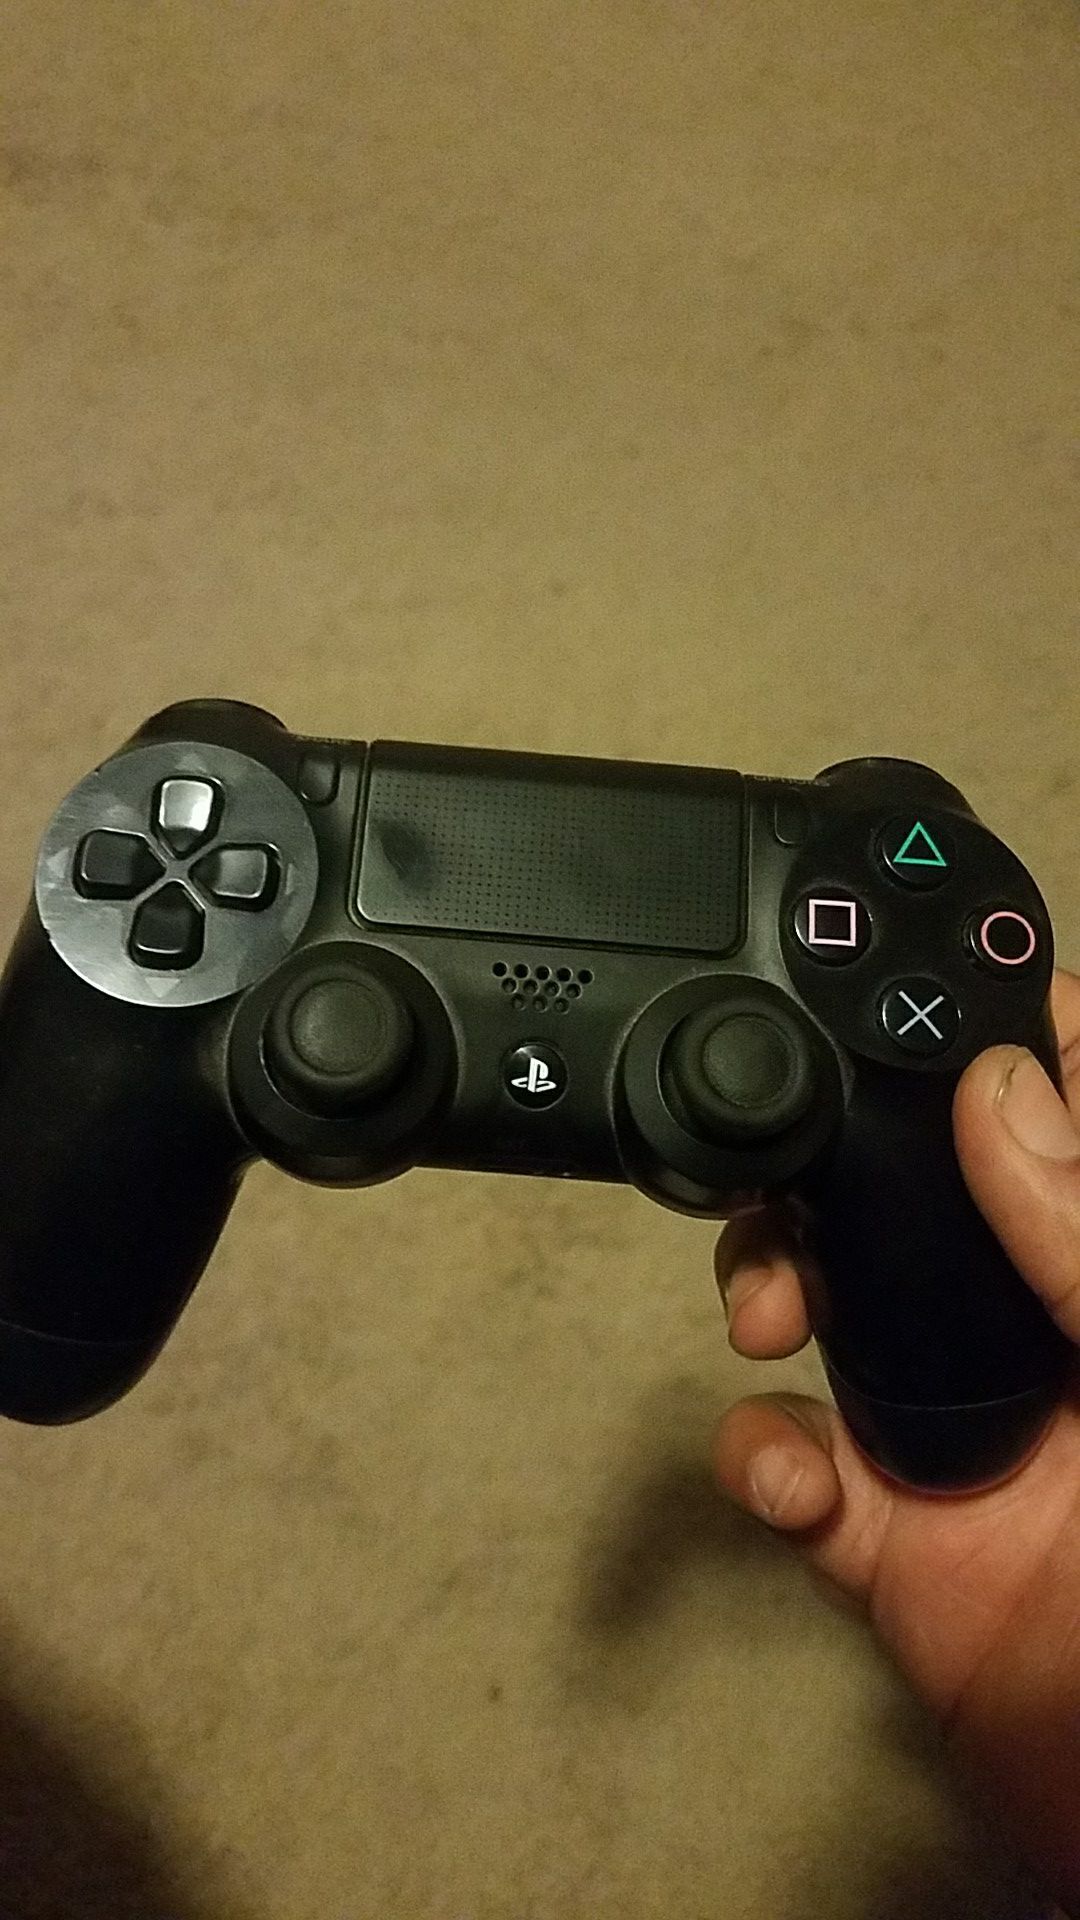 Ps4 cotroller yes it works